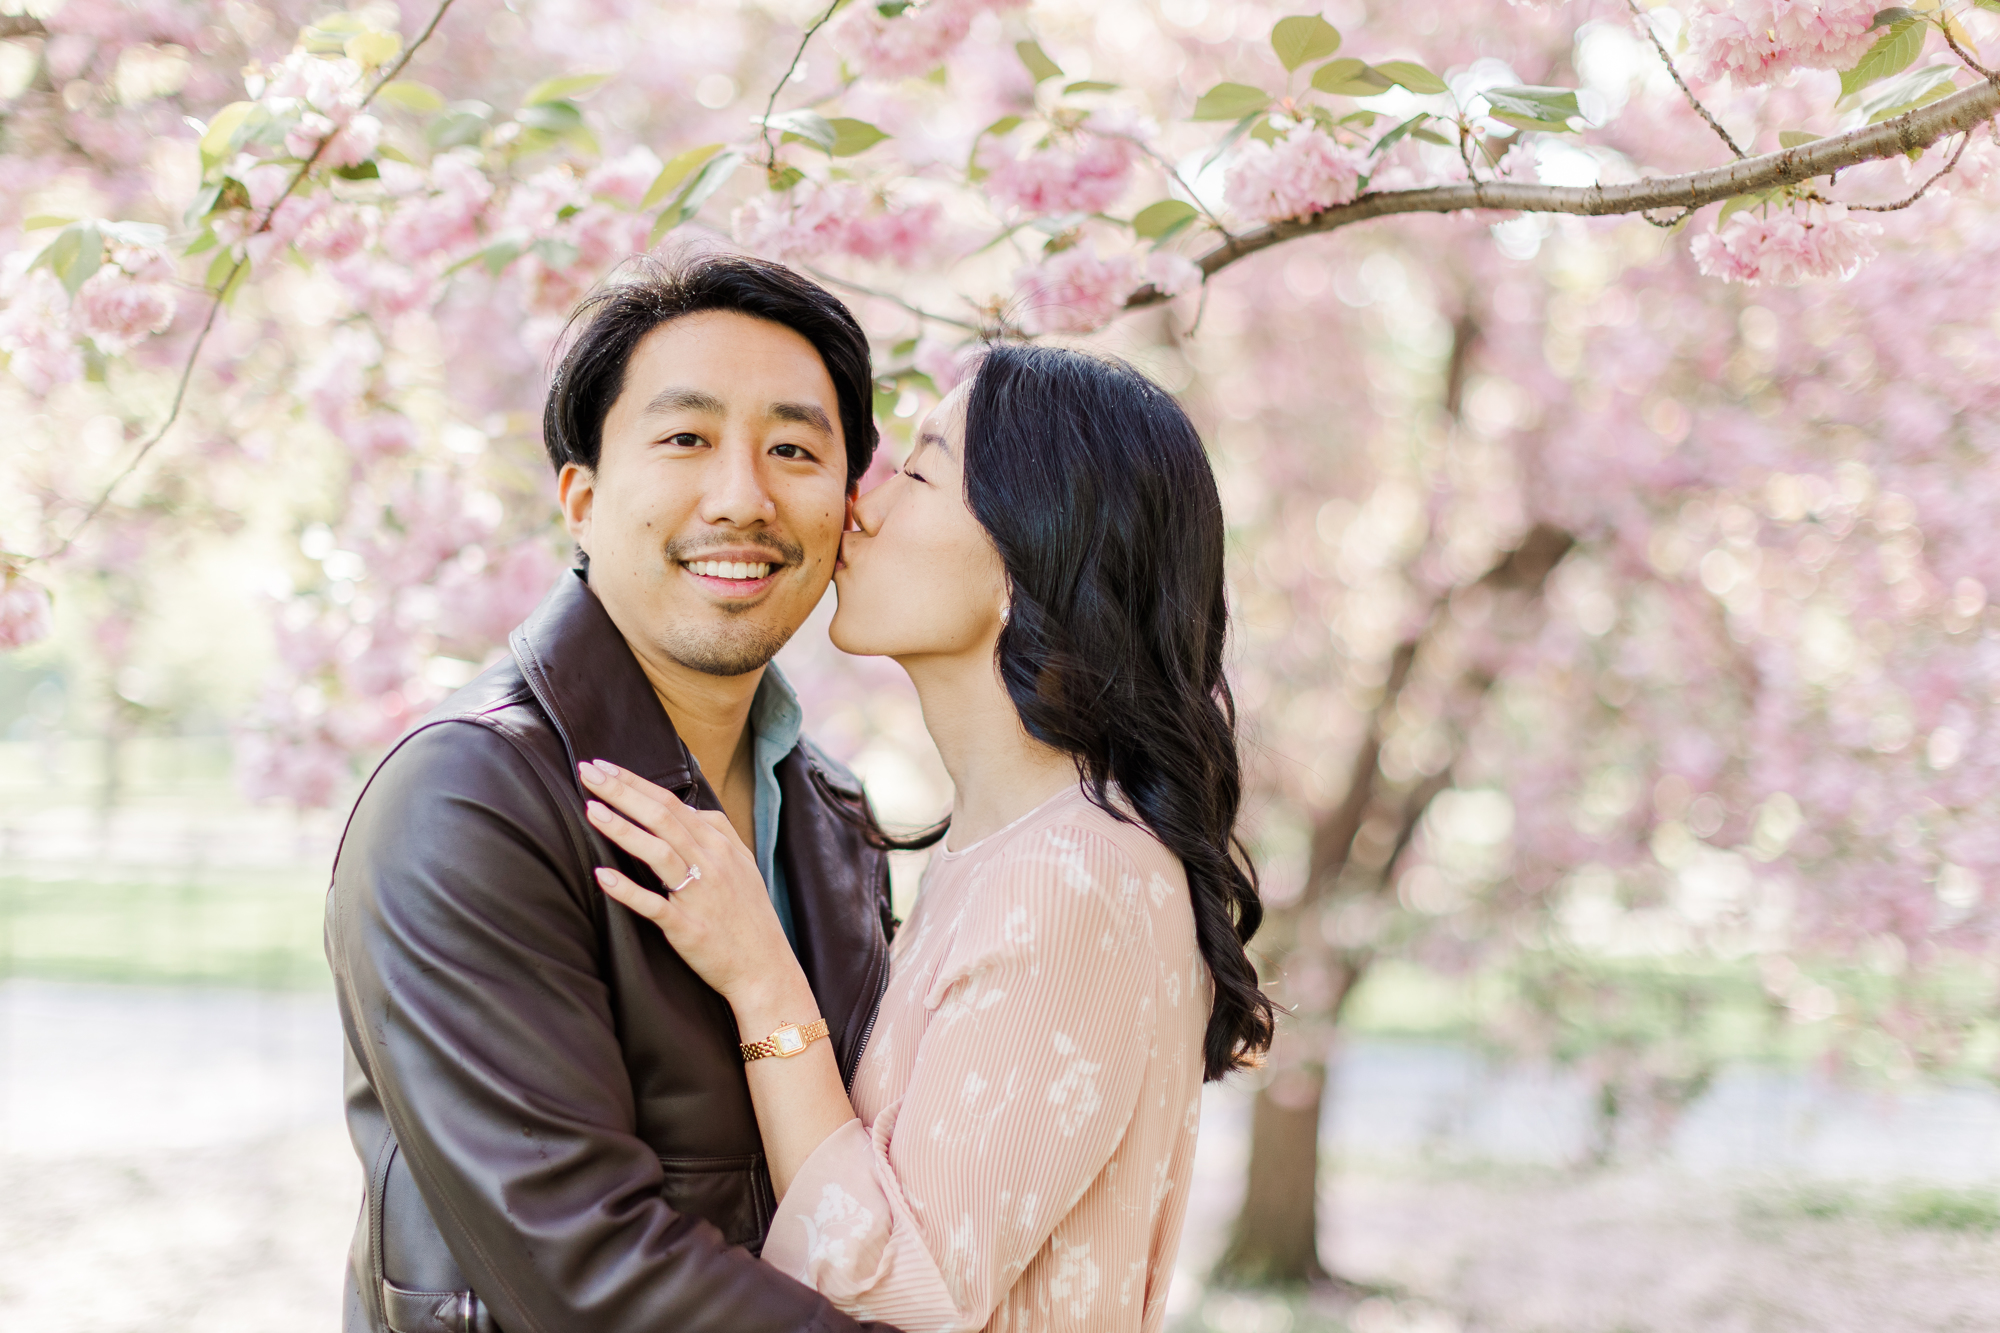 Striking Engagement Photos With Cherry Blossoms in NYC